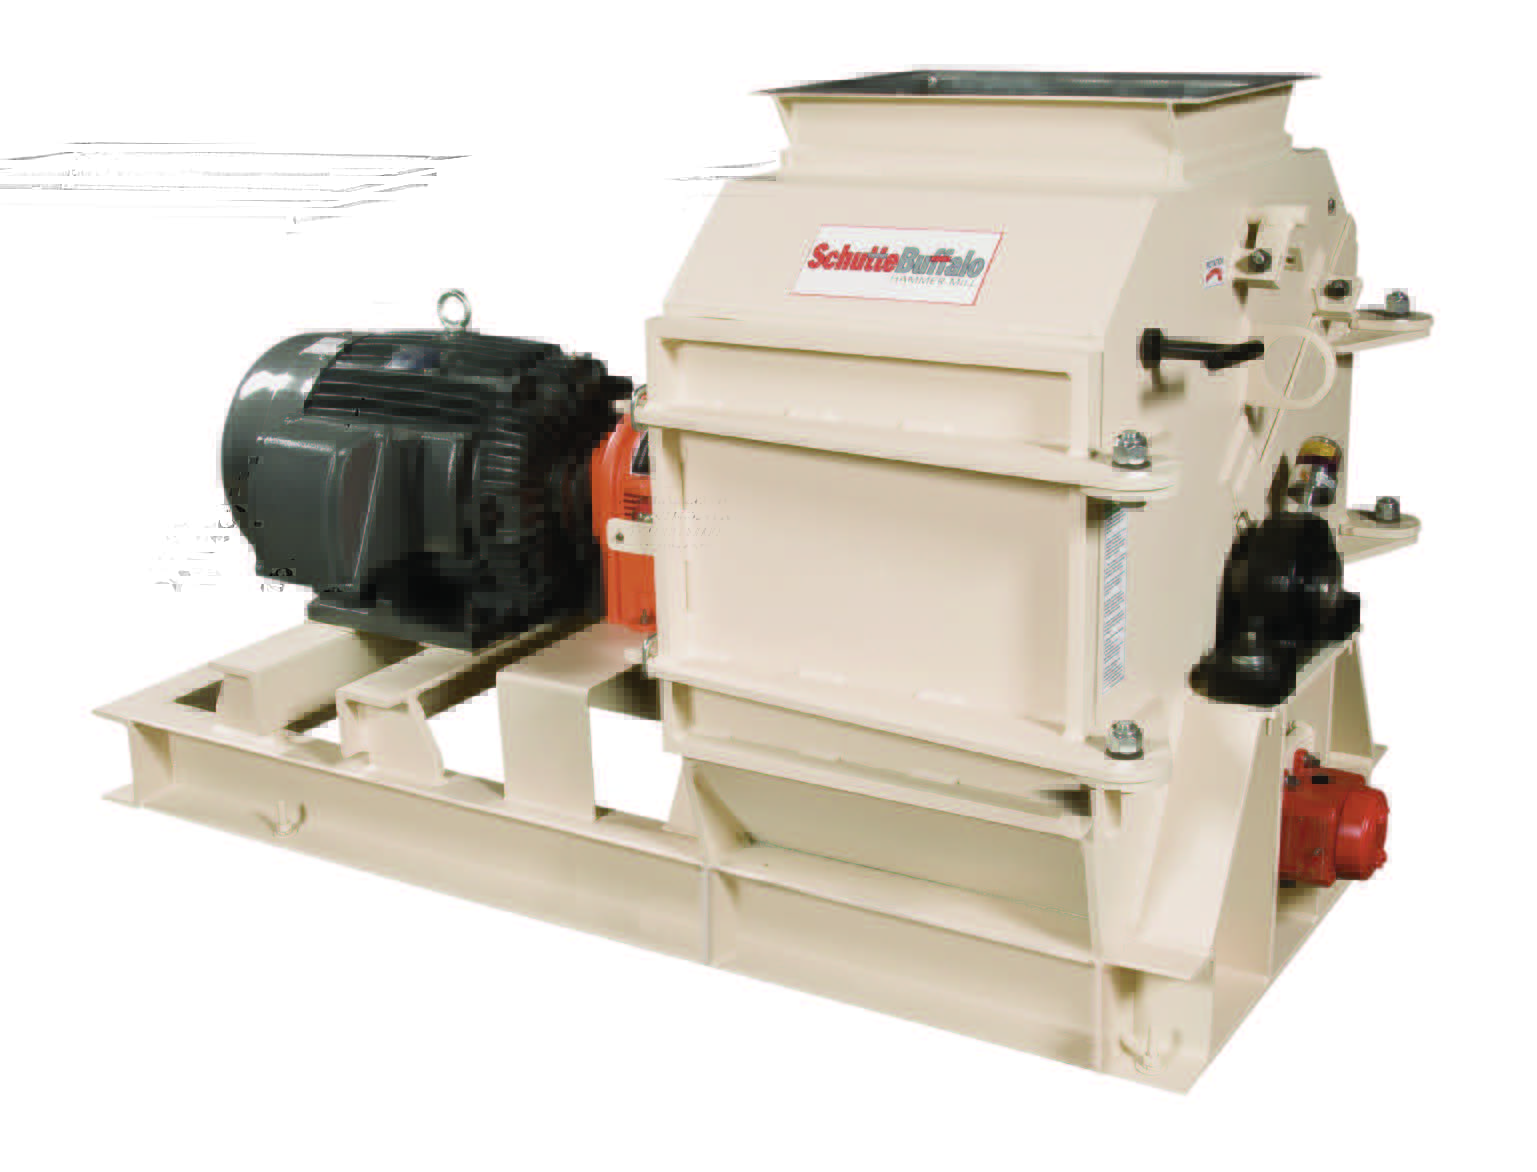 An industrial grain milling machine with a large motor and several mechanical components, mounted on a metal frame.